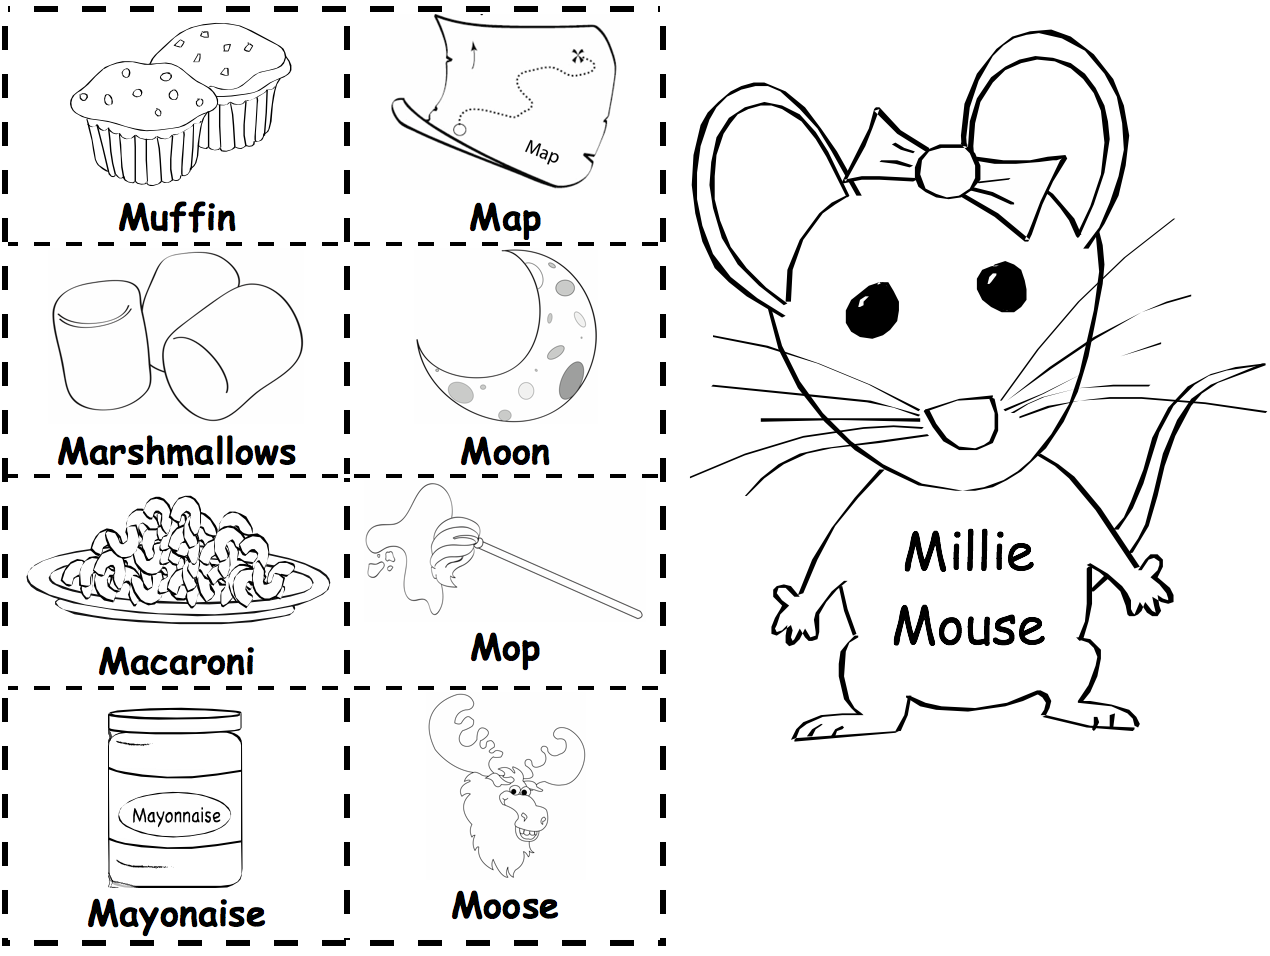 Millie-Mouse-and-Picture-Cards